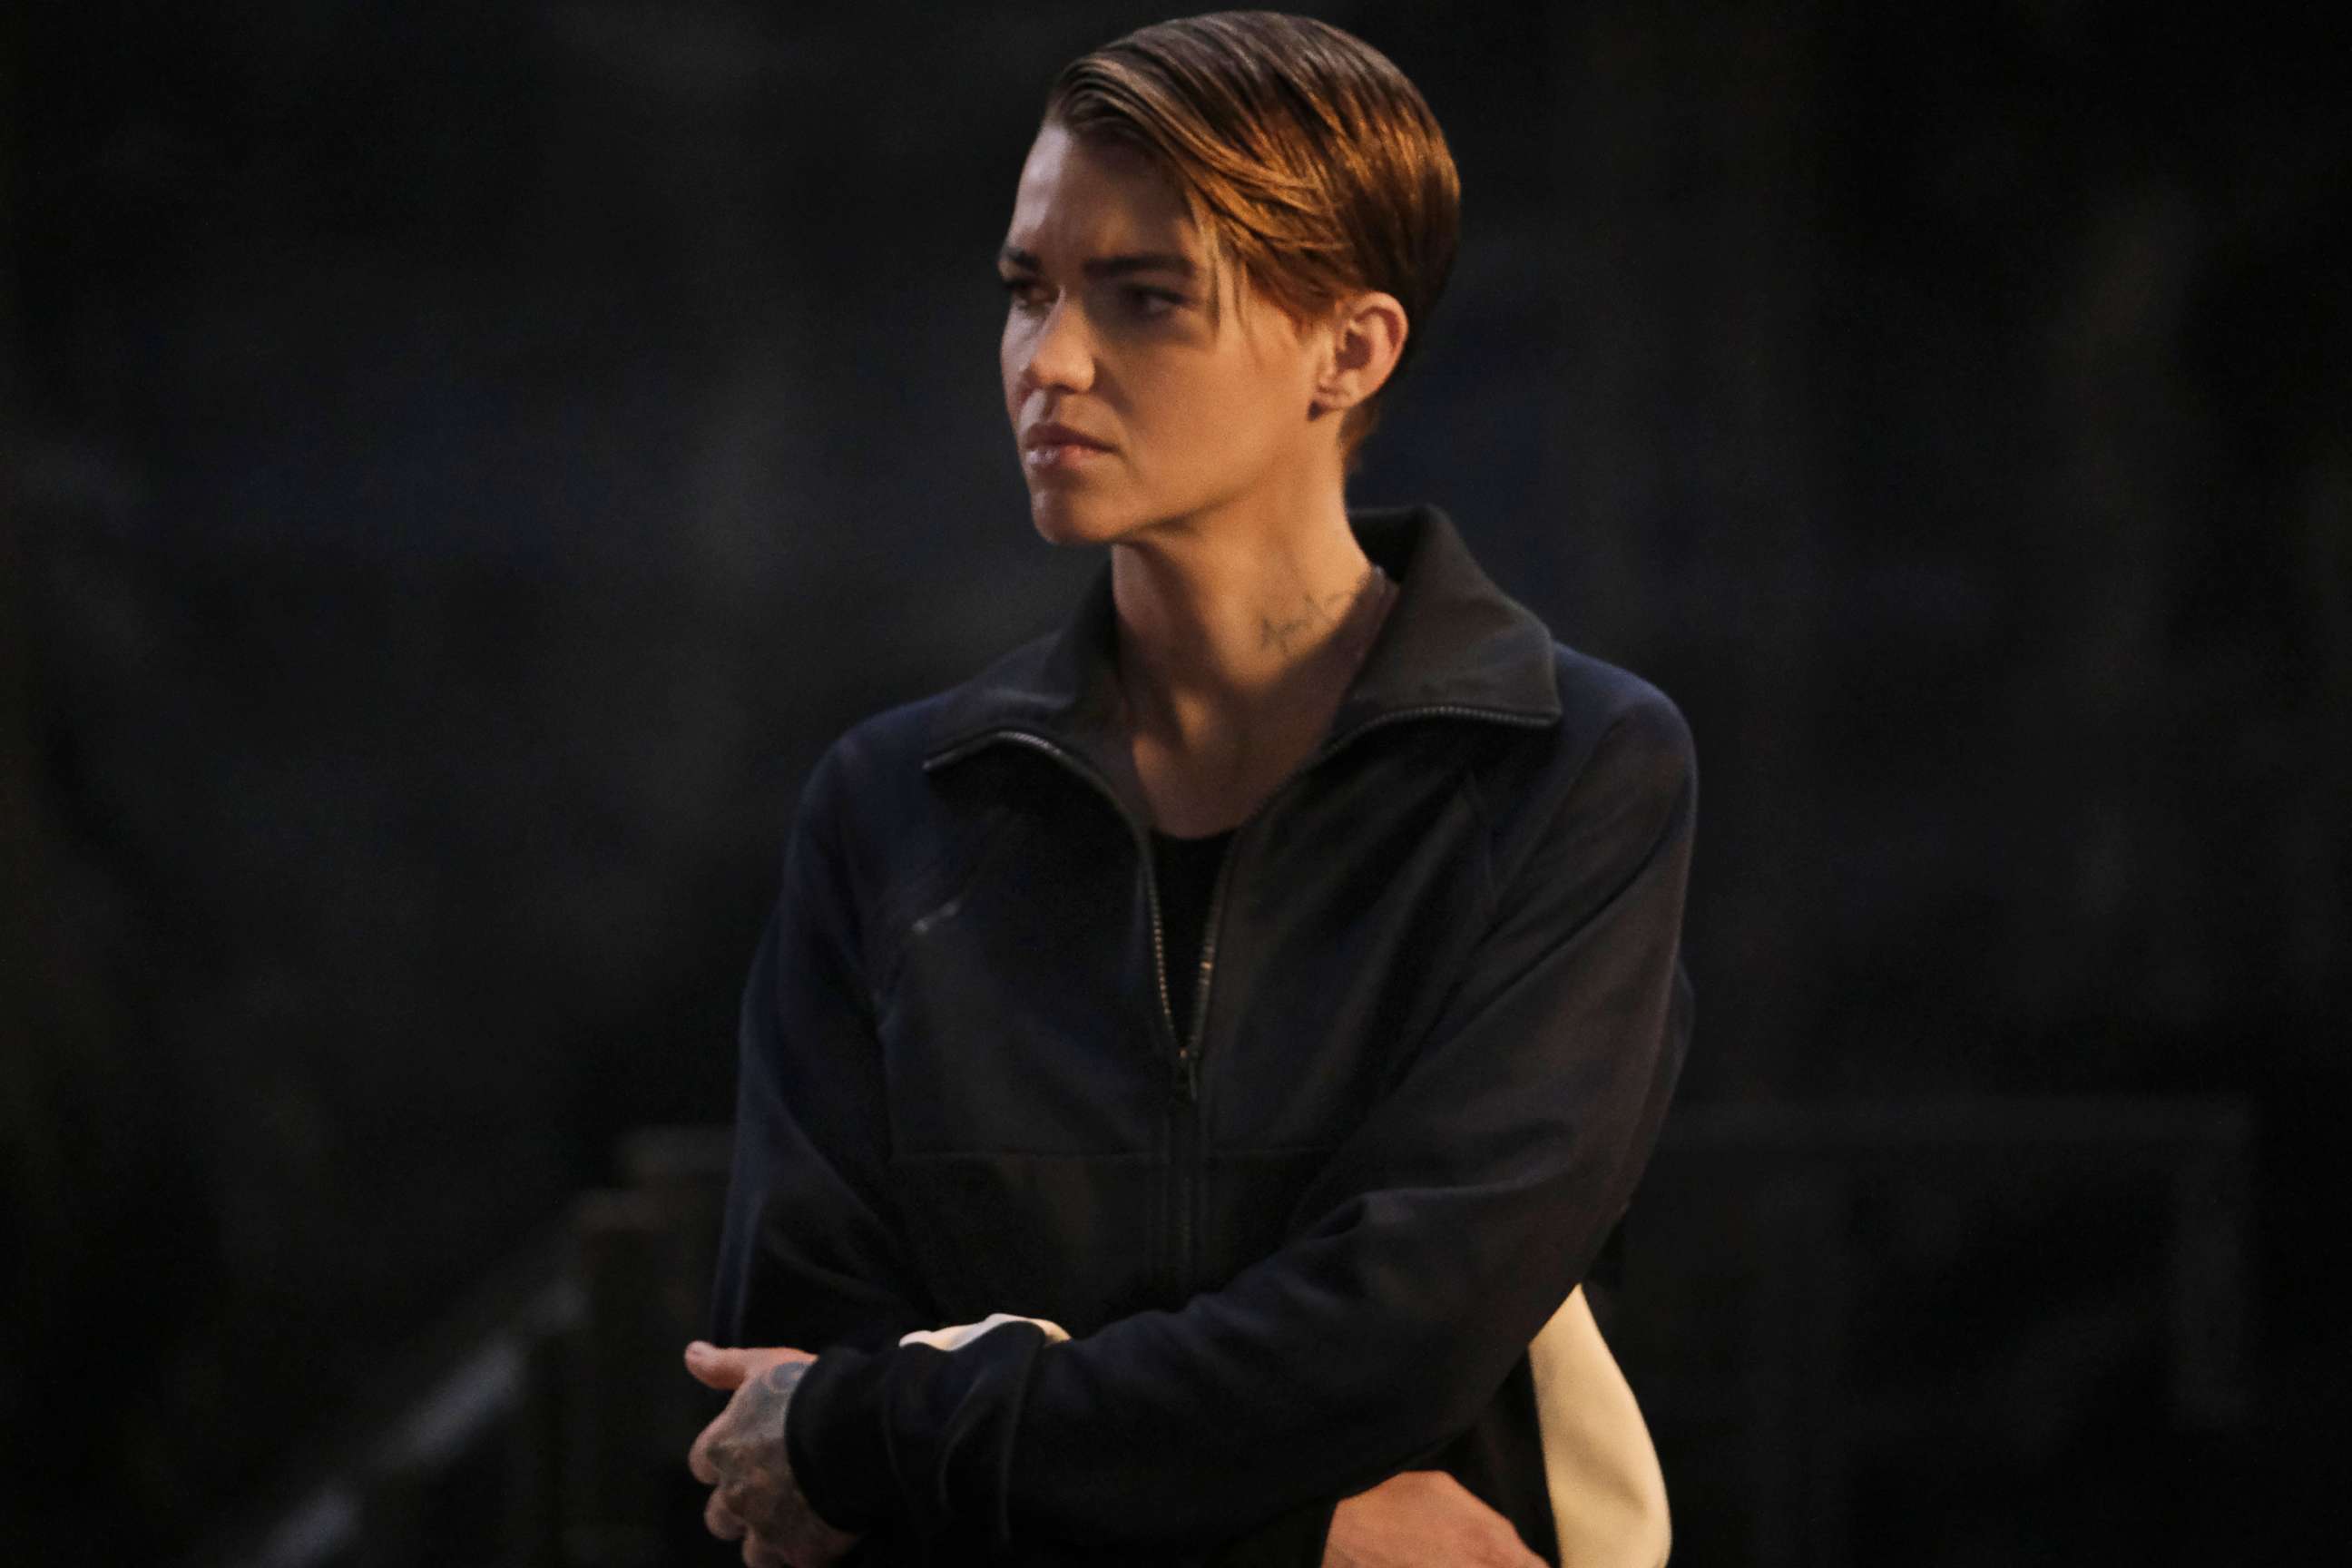 PHOTO: Ruby Rose as Kate Kane in The CW's "Batwoman" series, 2020.